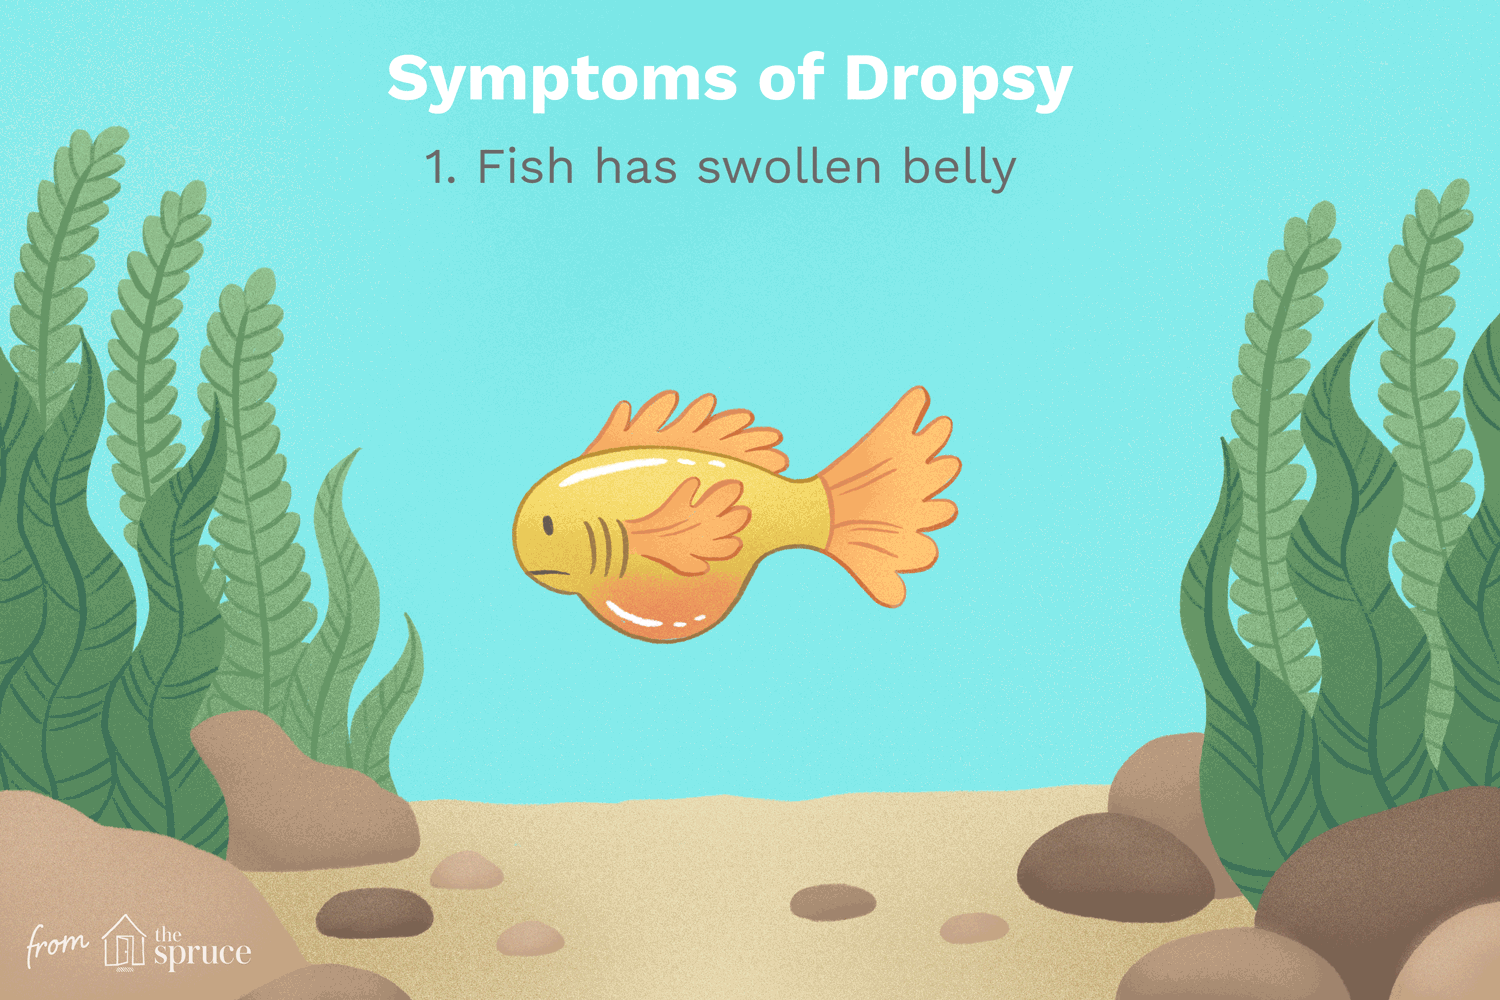 A GIF displaying the symptoms of dropsy in a fish